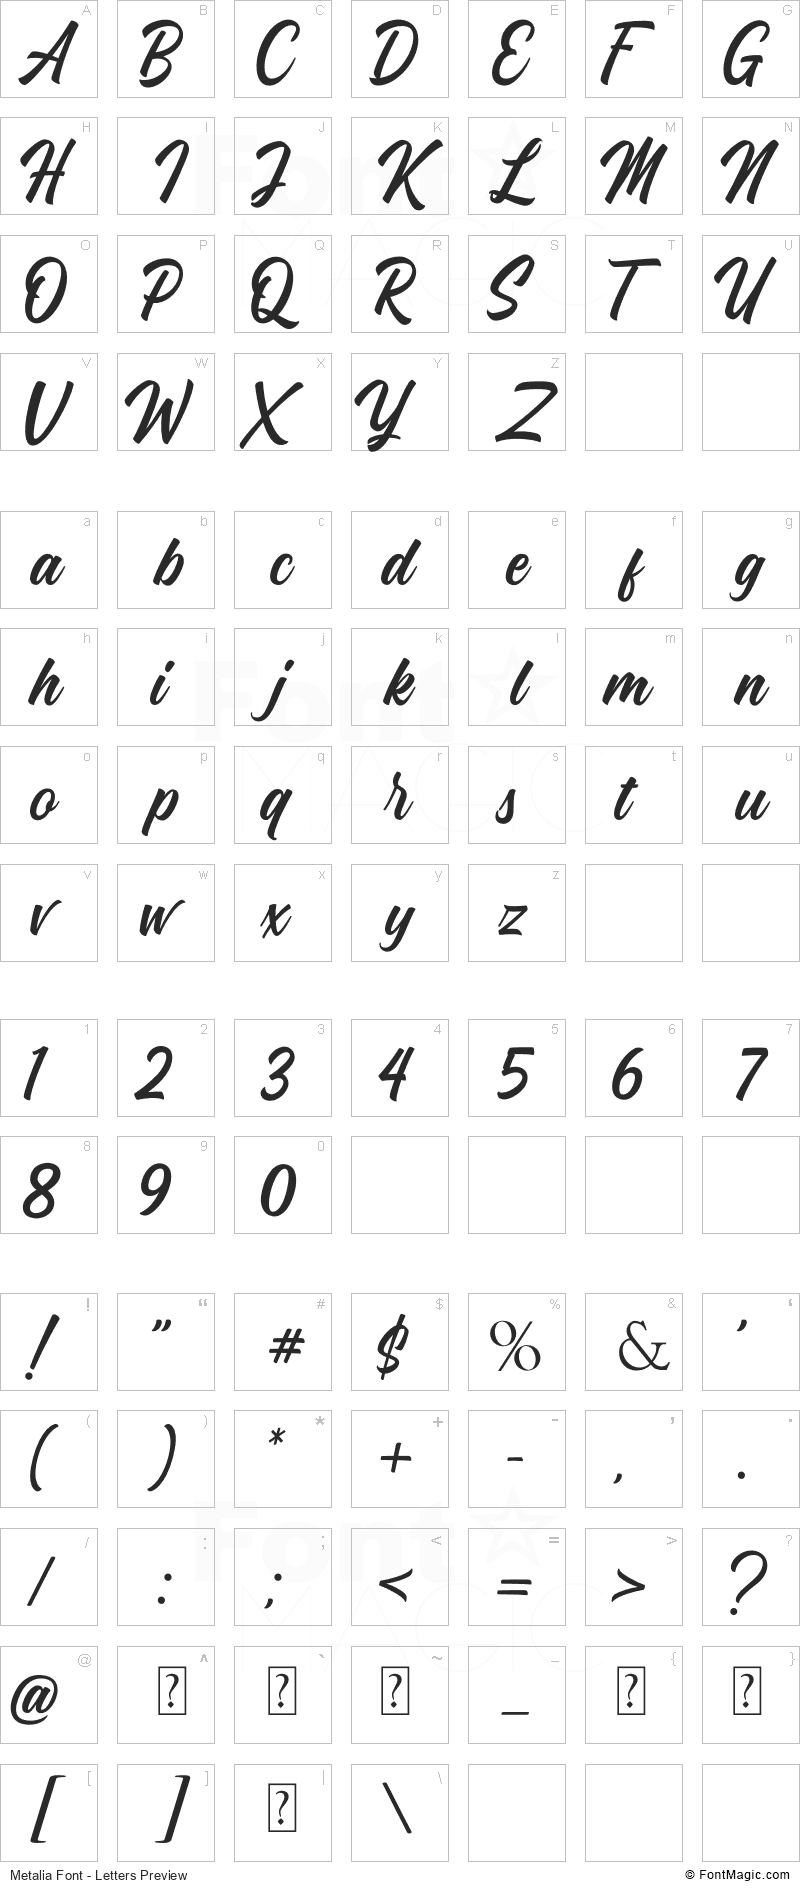 Metalia Font - All Latters Preview Chart